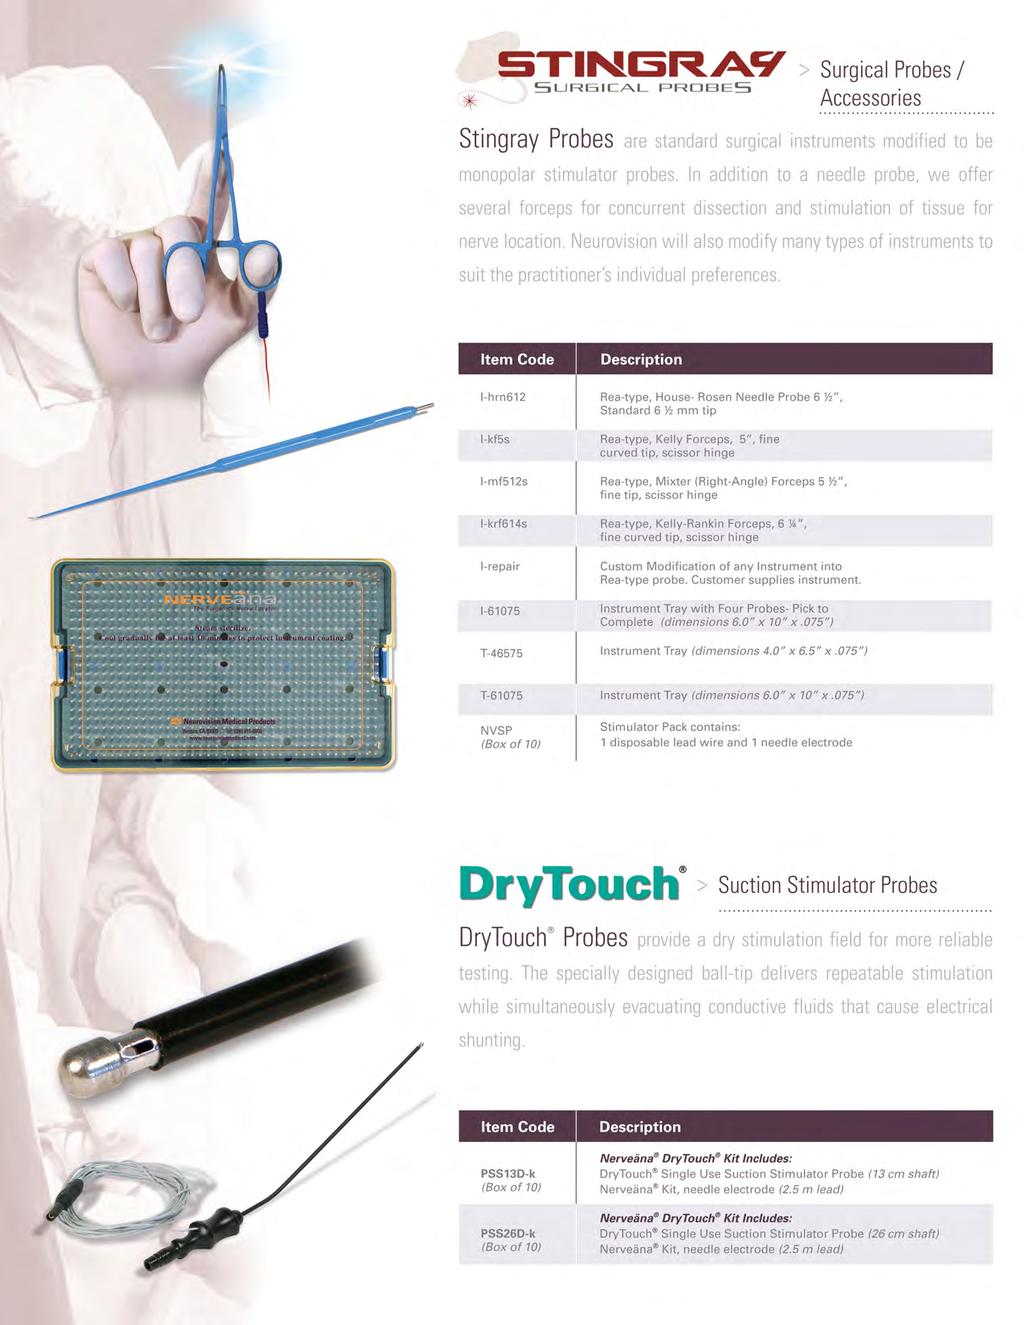 STINOM/W Surgical Probes / SURGICAL RIRCIEIS Accessories Stingray Probes are standard surgical instruments modified to be monopolar stimulator probes.